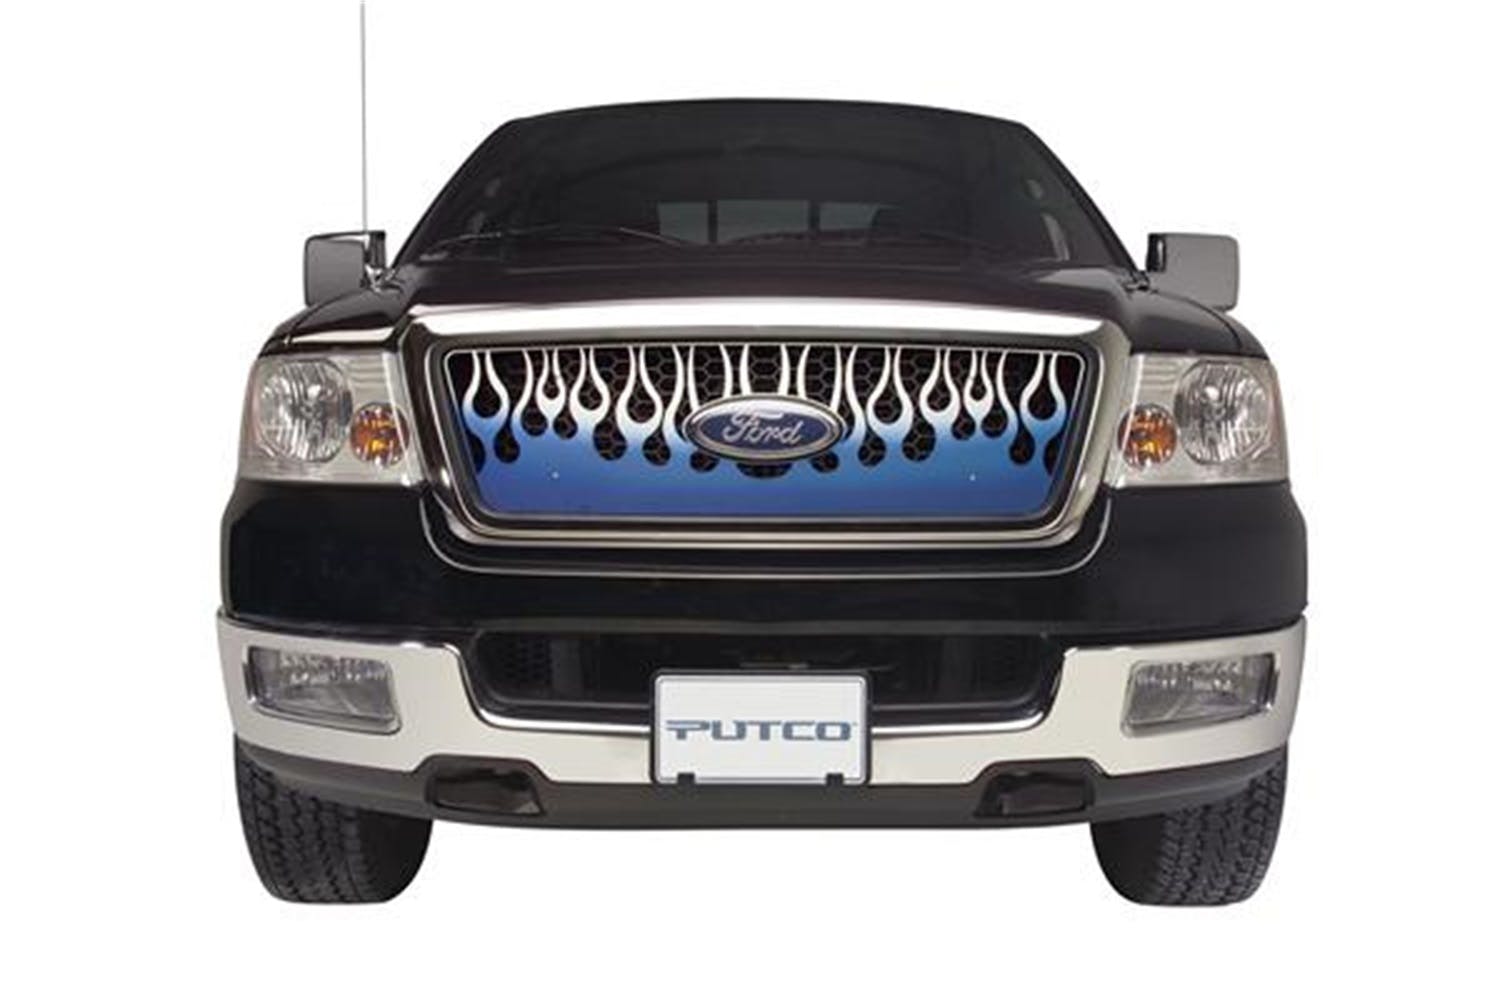 Putco 89459 Flaming Inferno Stainless Steel Grilles - Blue (Painted)